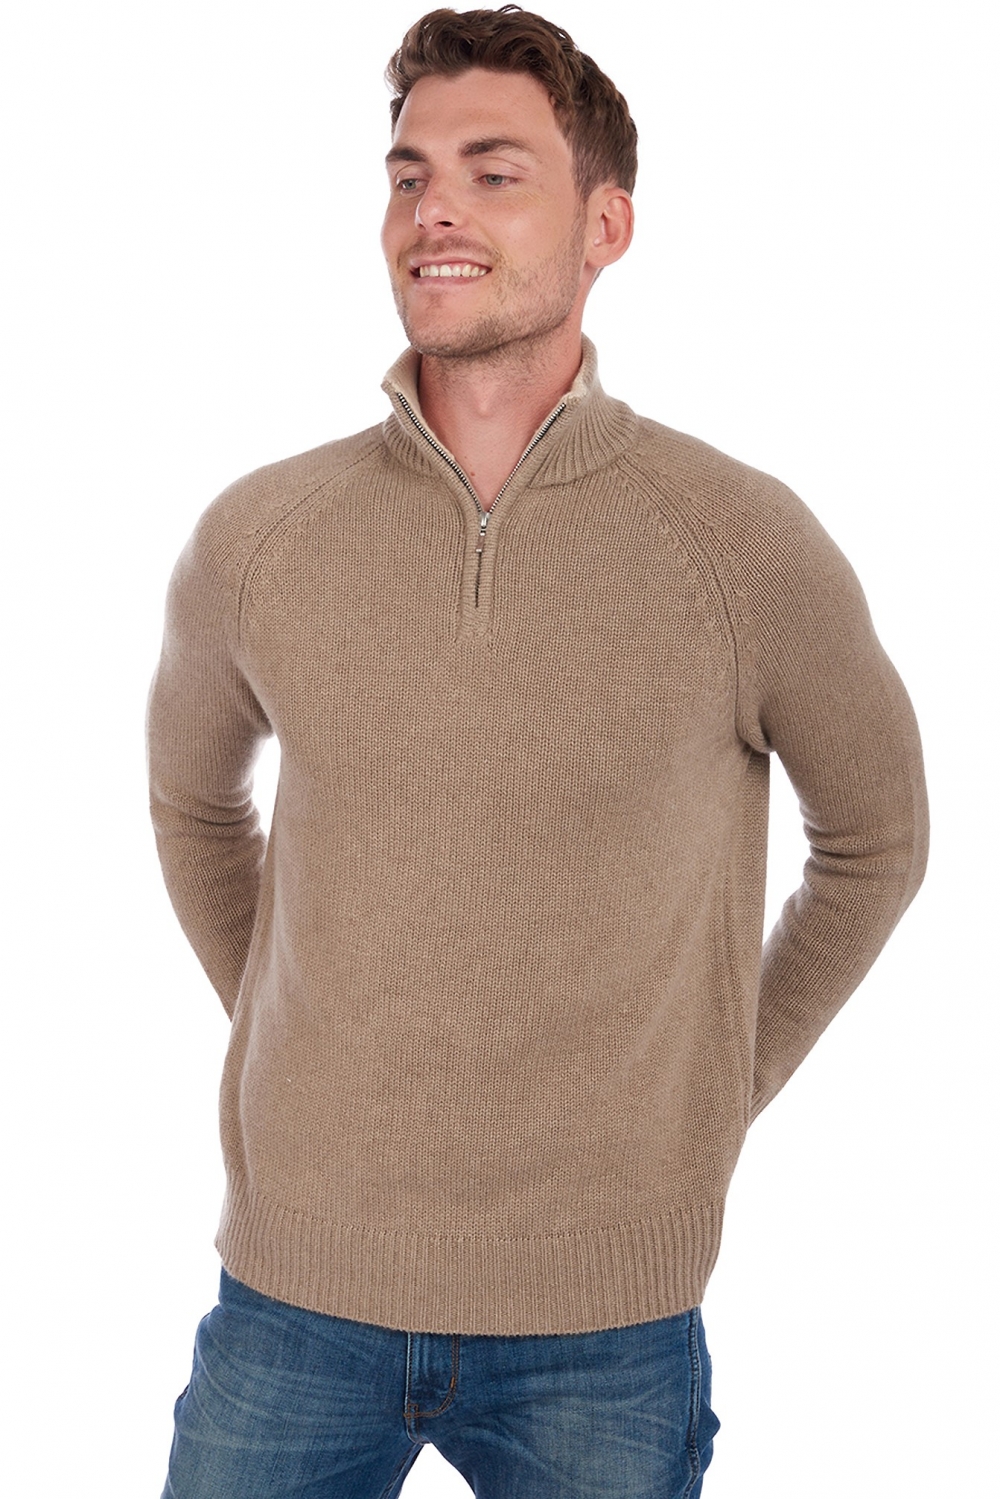 Cashmere men polo style sweaters angers natural brown natural beige 4xl